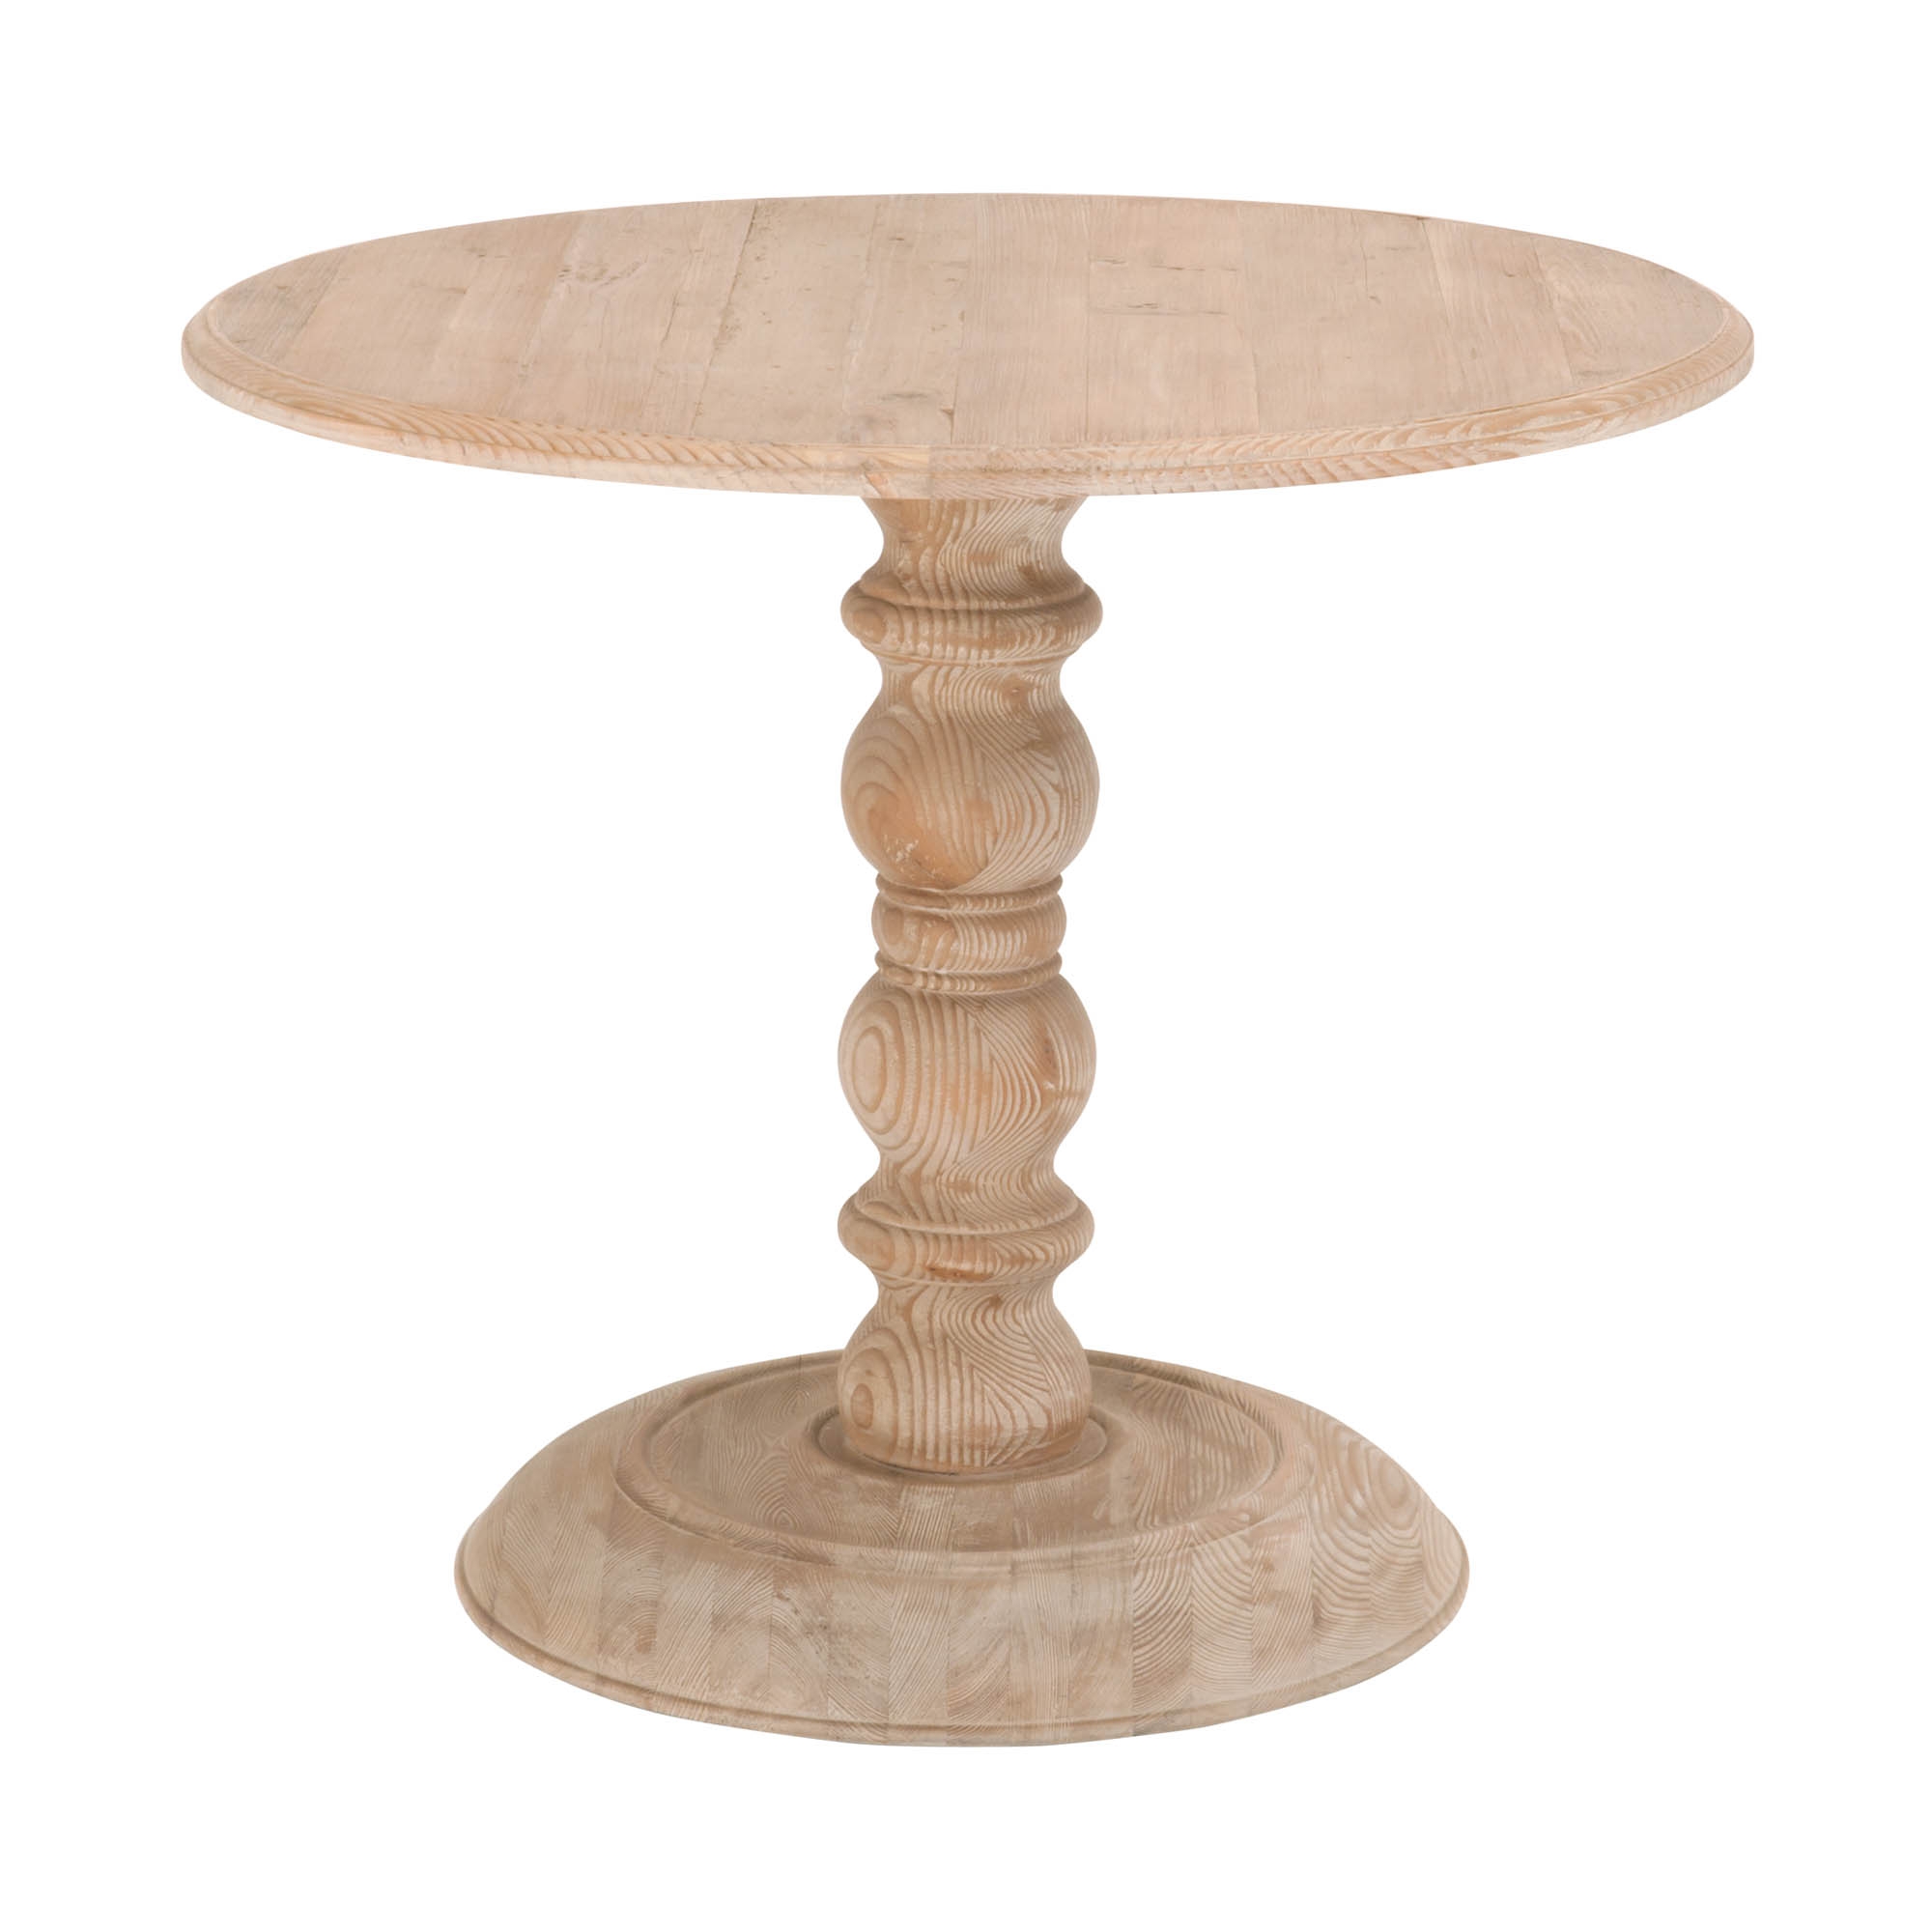 Chelsea Round Dining Table, 36" - Image 1